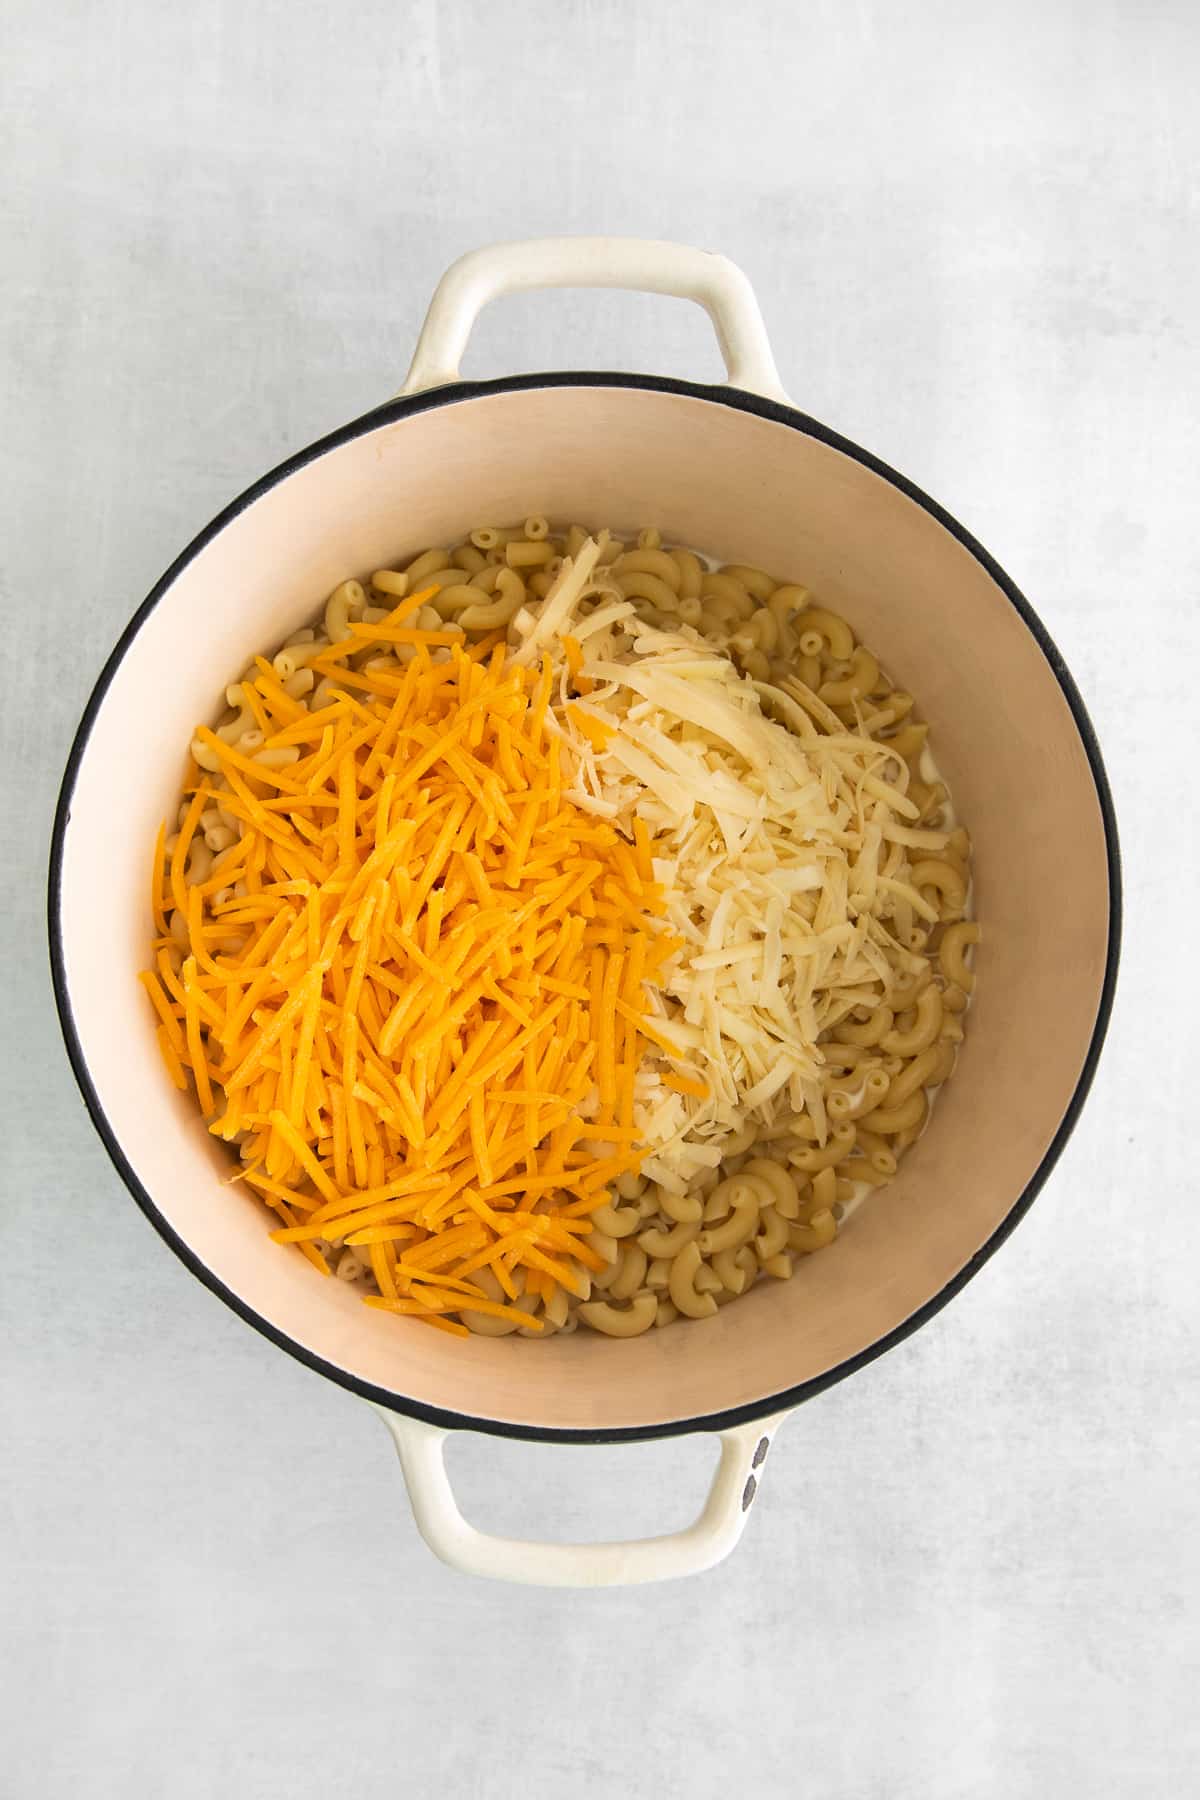 shredded cheese and noodles in Dutch oven.